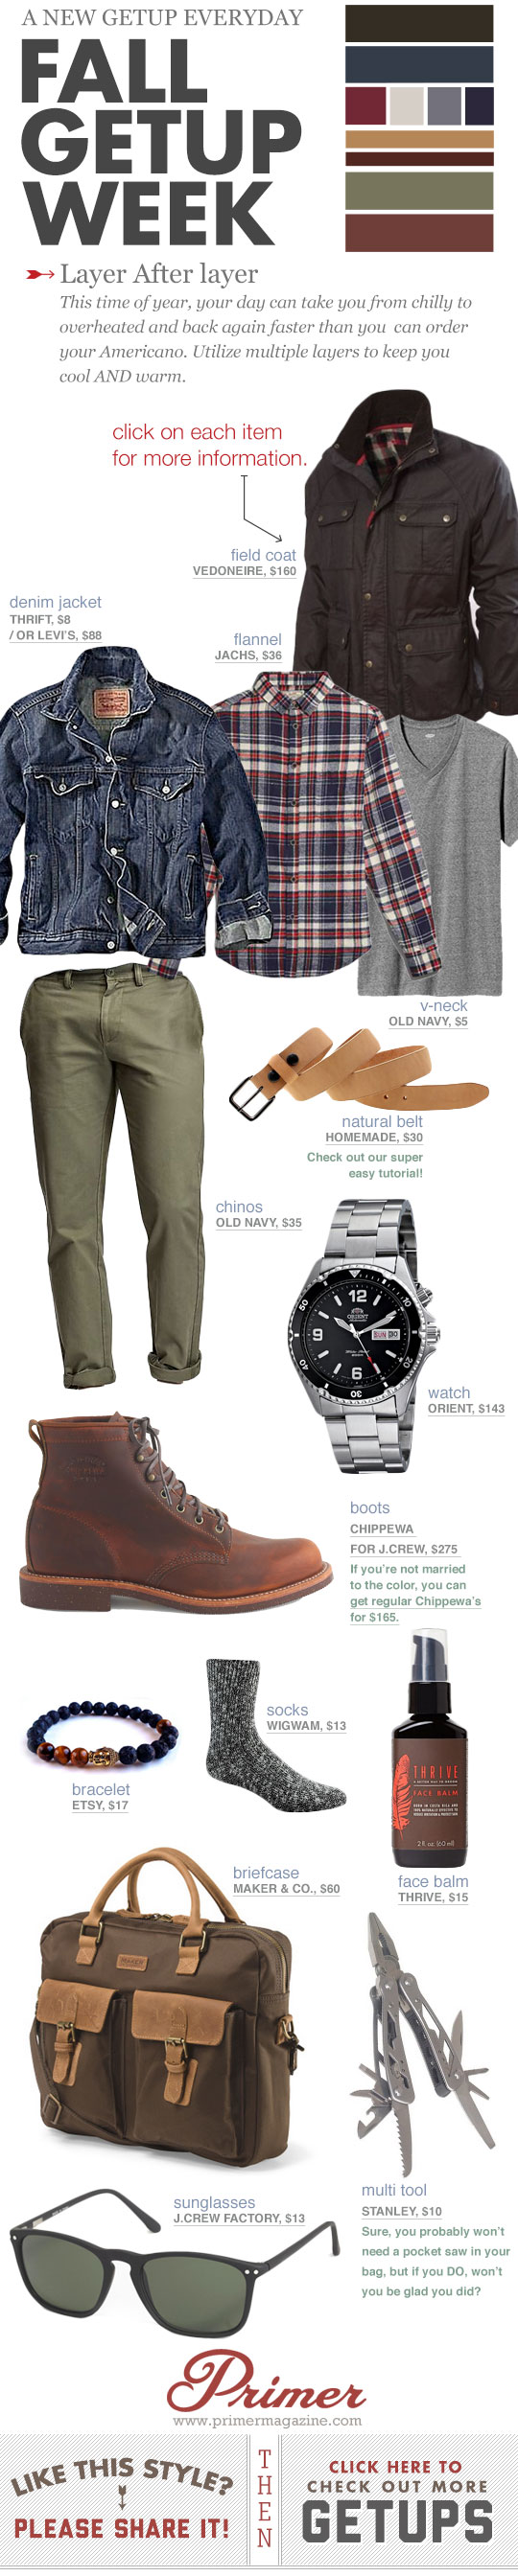 Fall Getup Week - outfit inspiration with denim jacket, plaid shirt, green pants, and boots